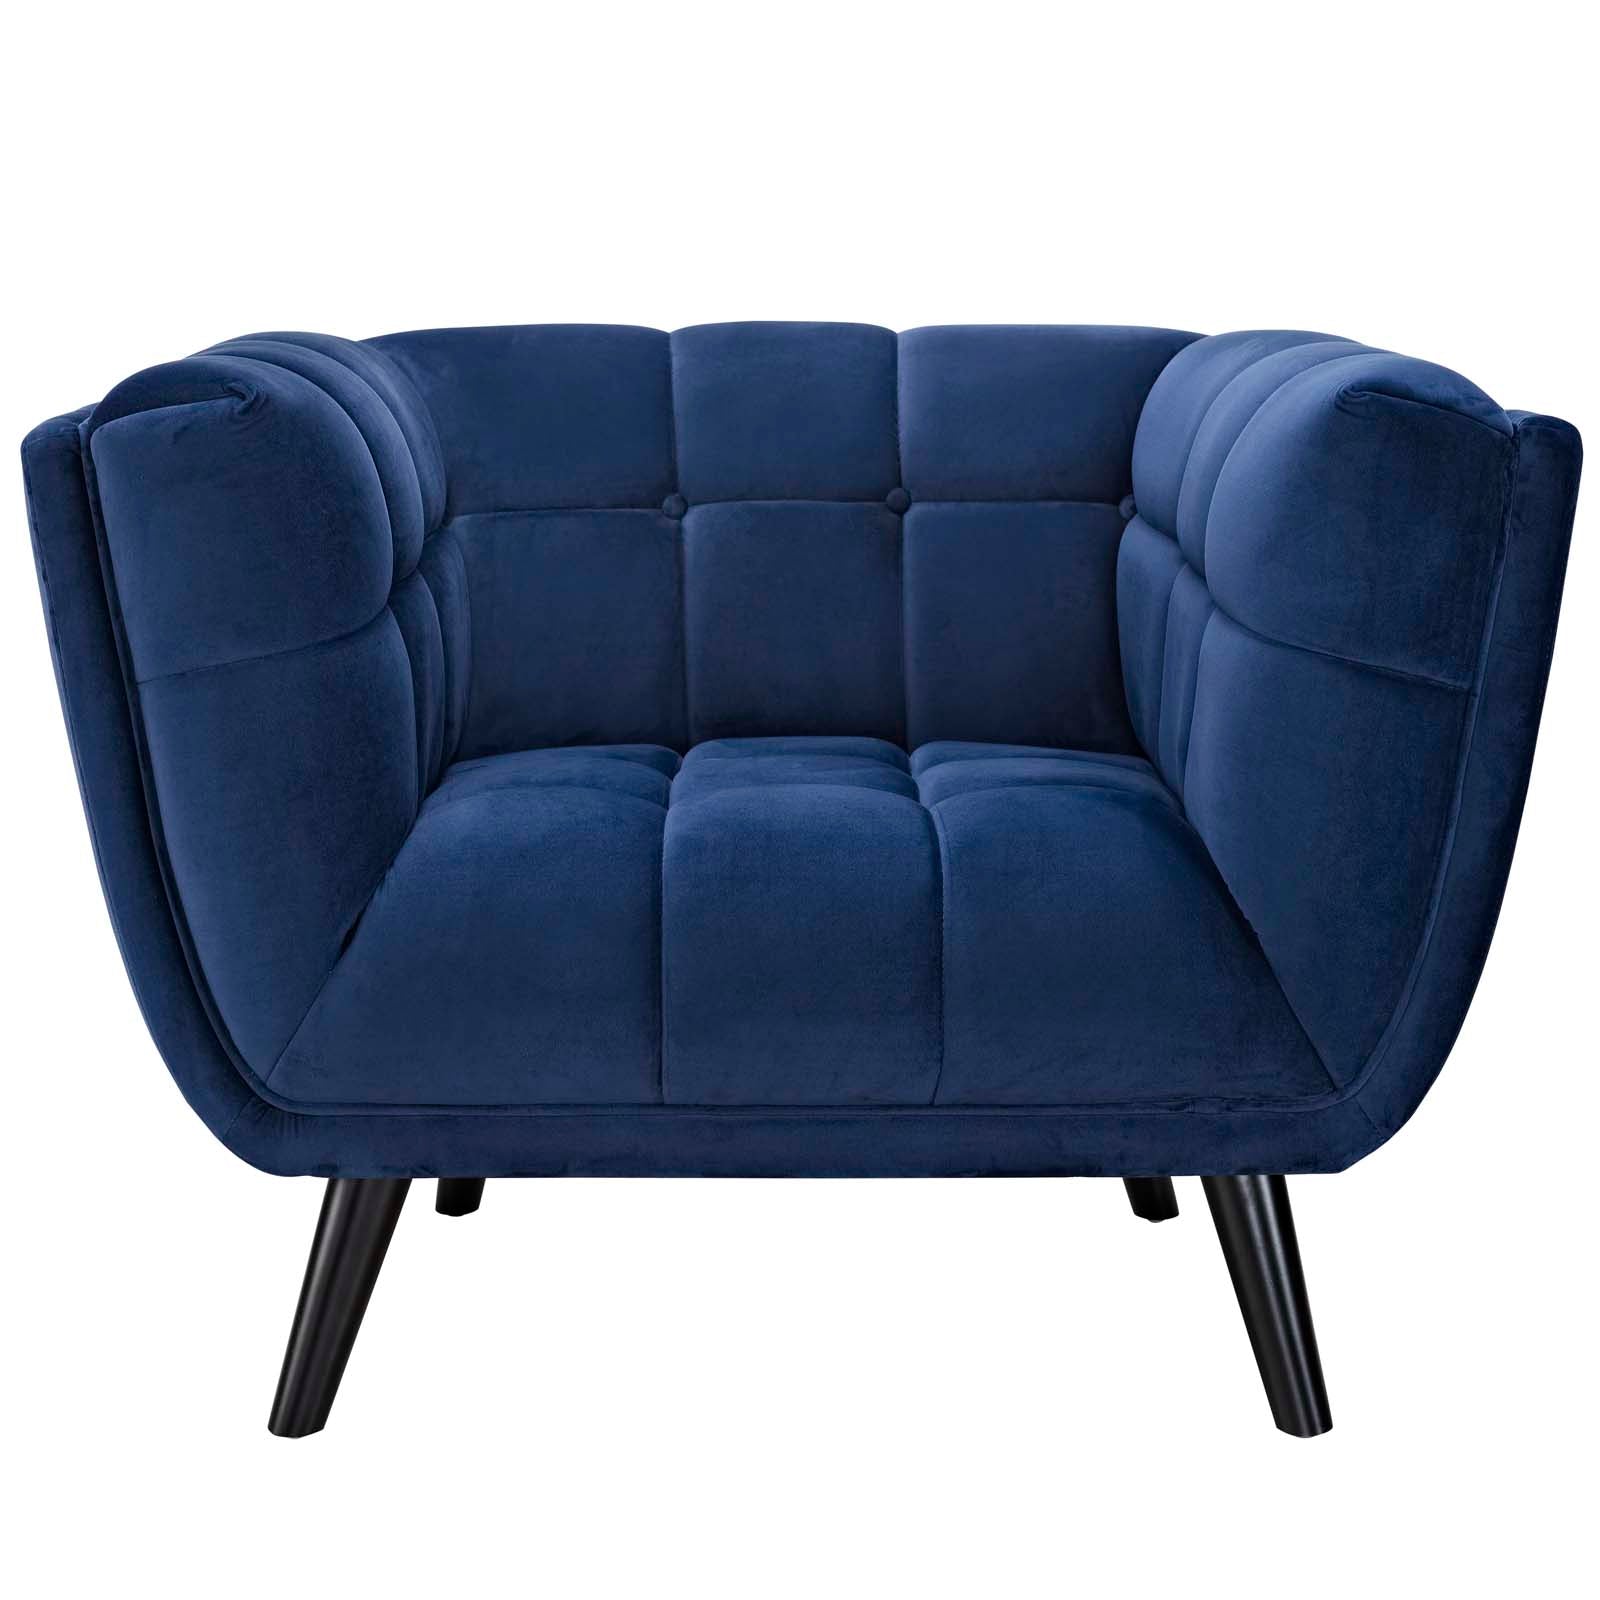 Modway Living Room Sets - Bestow 2 Piece Performance Velvet Sofa and Armchair Set Navy